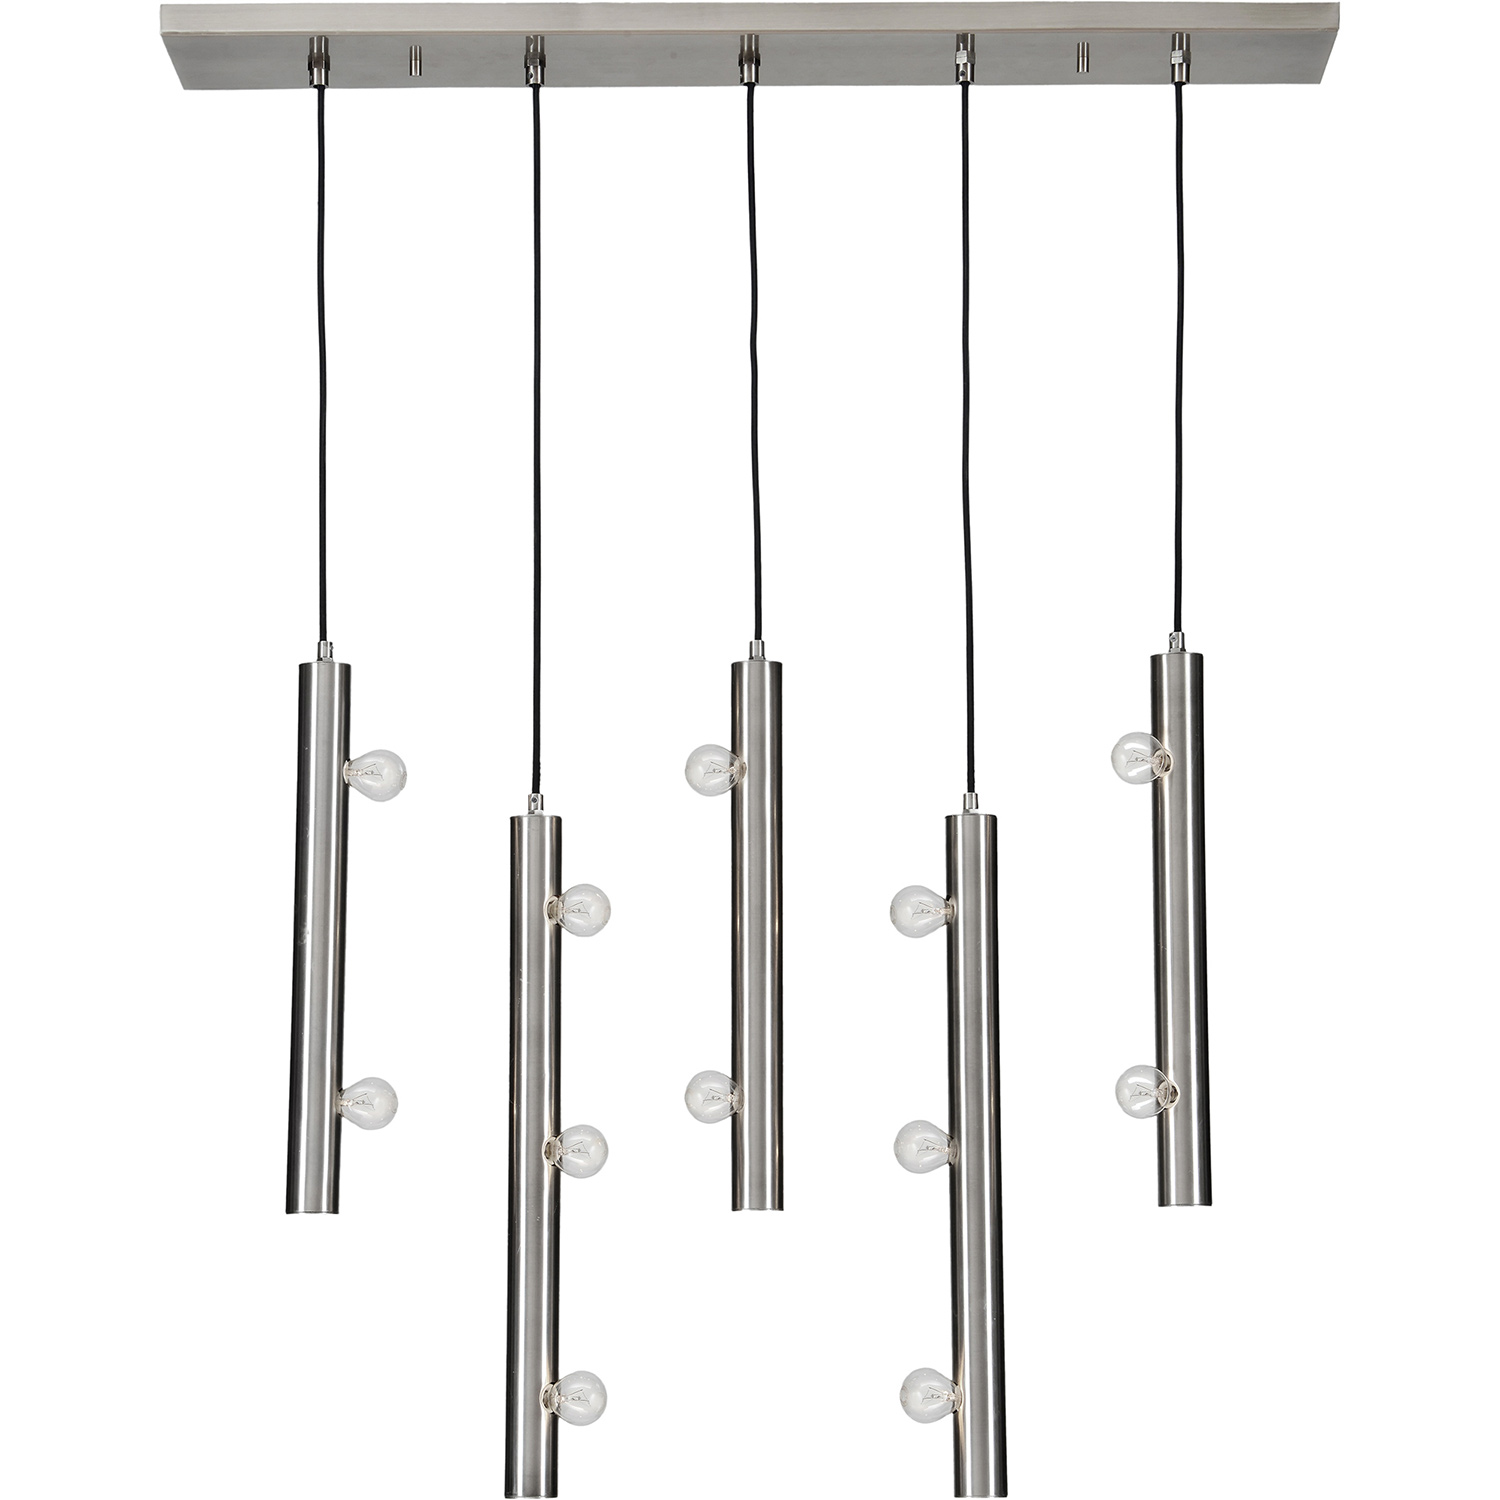 Ren-Wil Saxton Ceiling Fixture - Pewter Plated